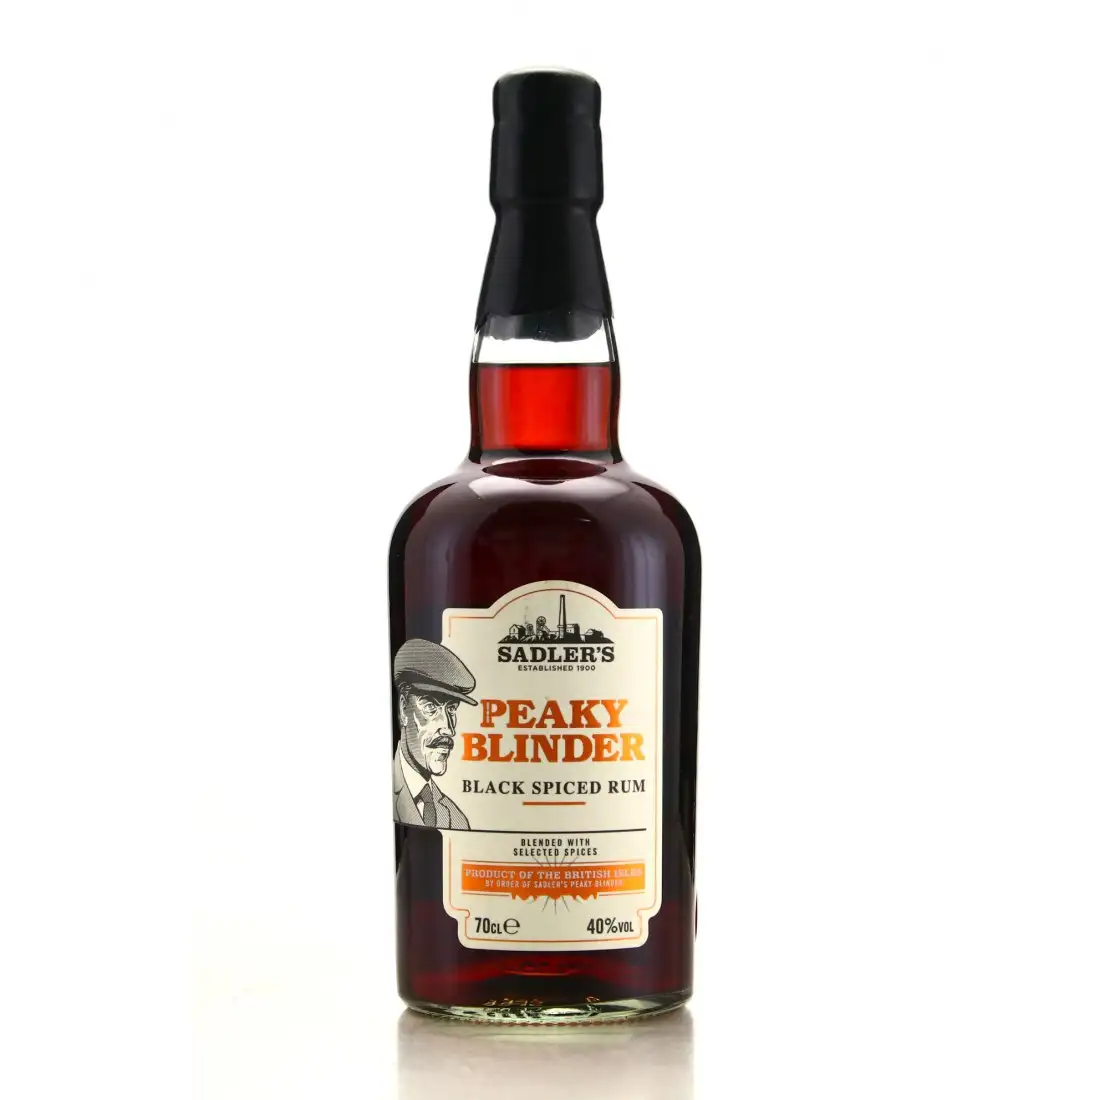 Image of the front of the bottle of the rum Saddlers Peaky Blinder Black Spiced Rum